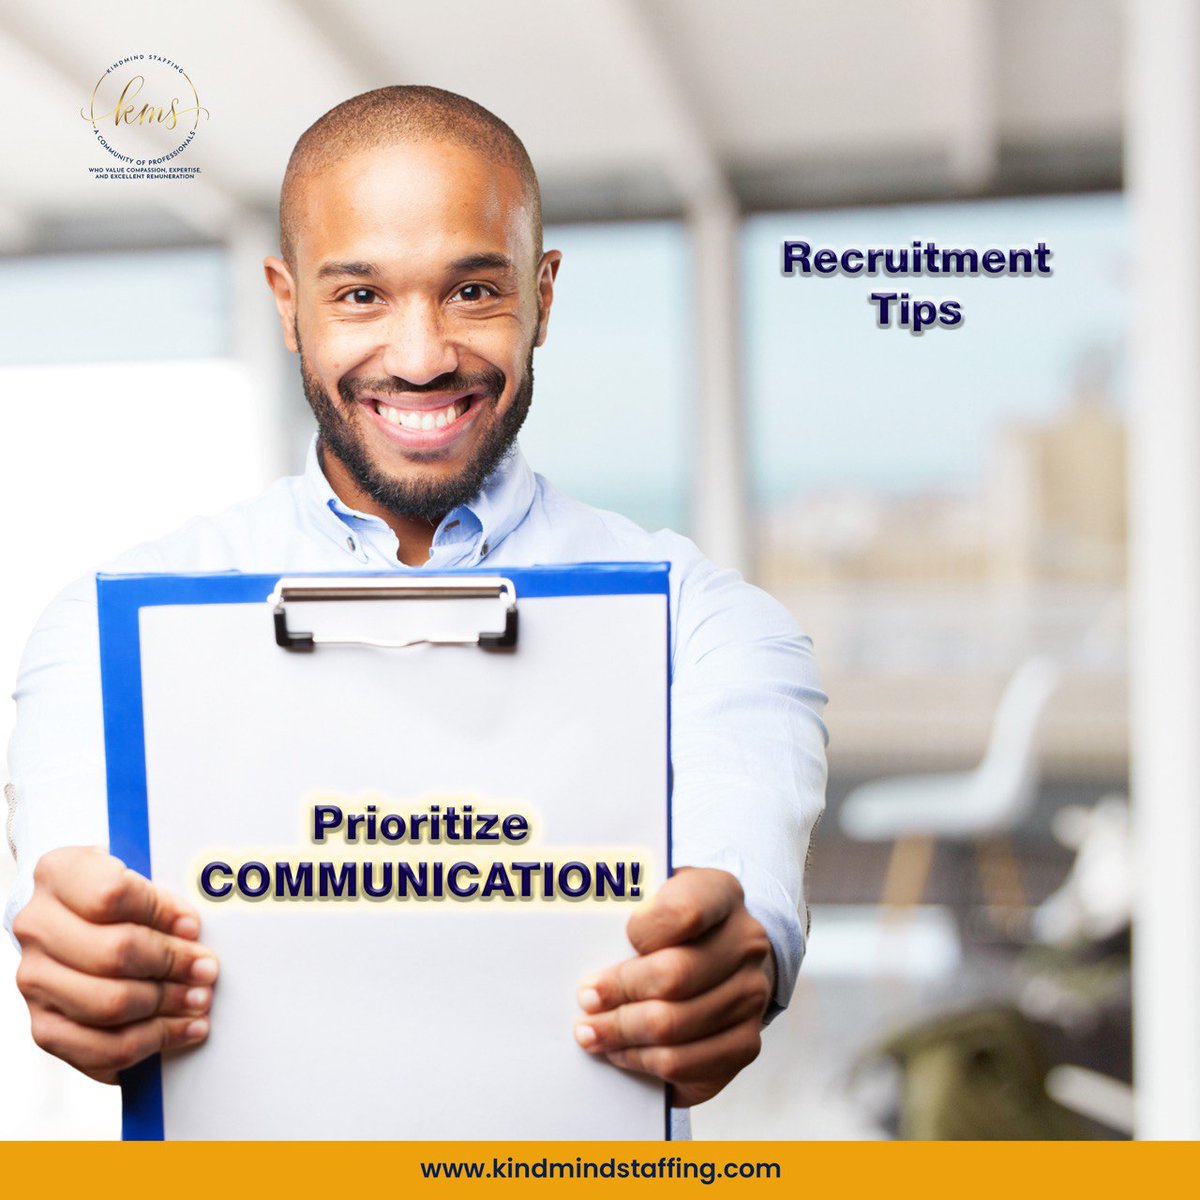 Prioritize COMMUNICATION! 

Clear and open communication with clients and candidates is the key to success. It builds trust, manages expectations, and leads to better outcomes for everyone involved. 🤝💼

#RecruitmentTips #NursingStaffing #CommunicationMatters